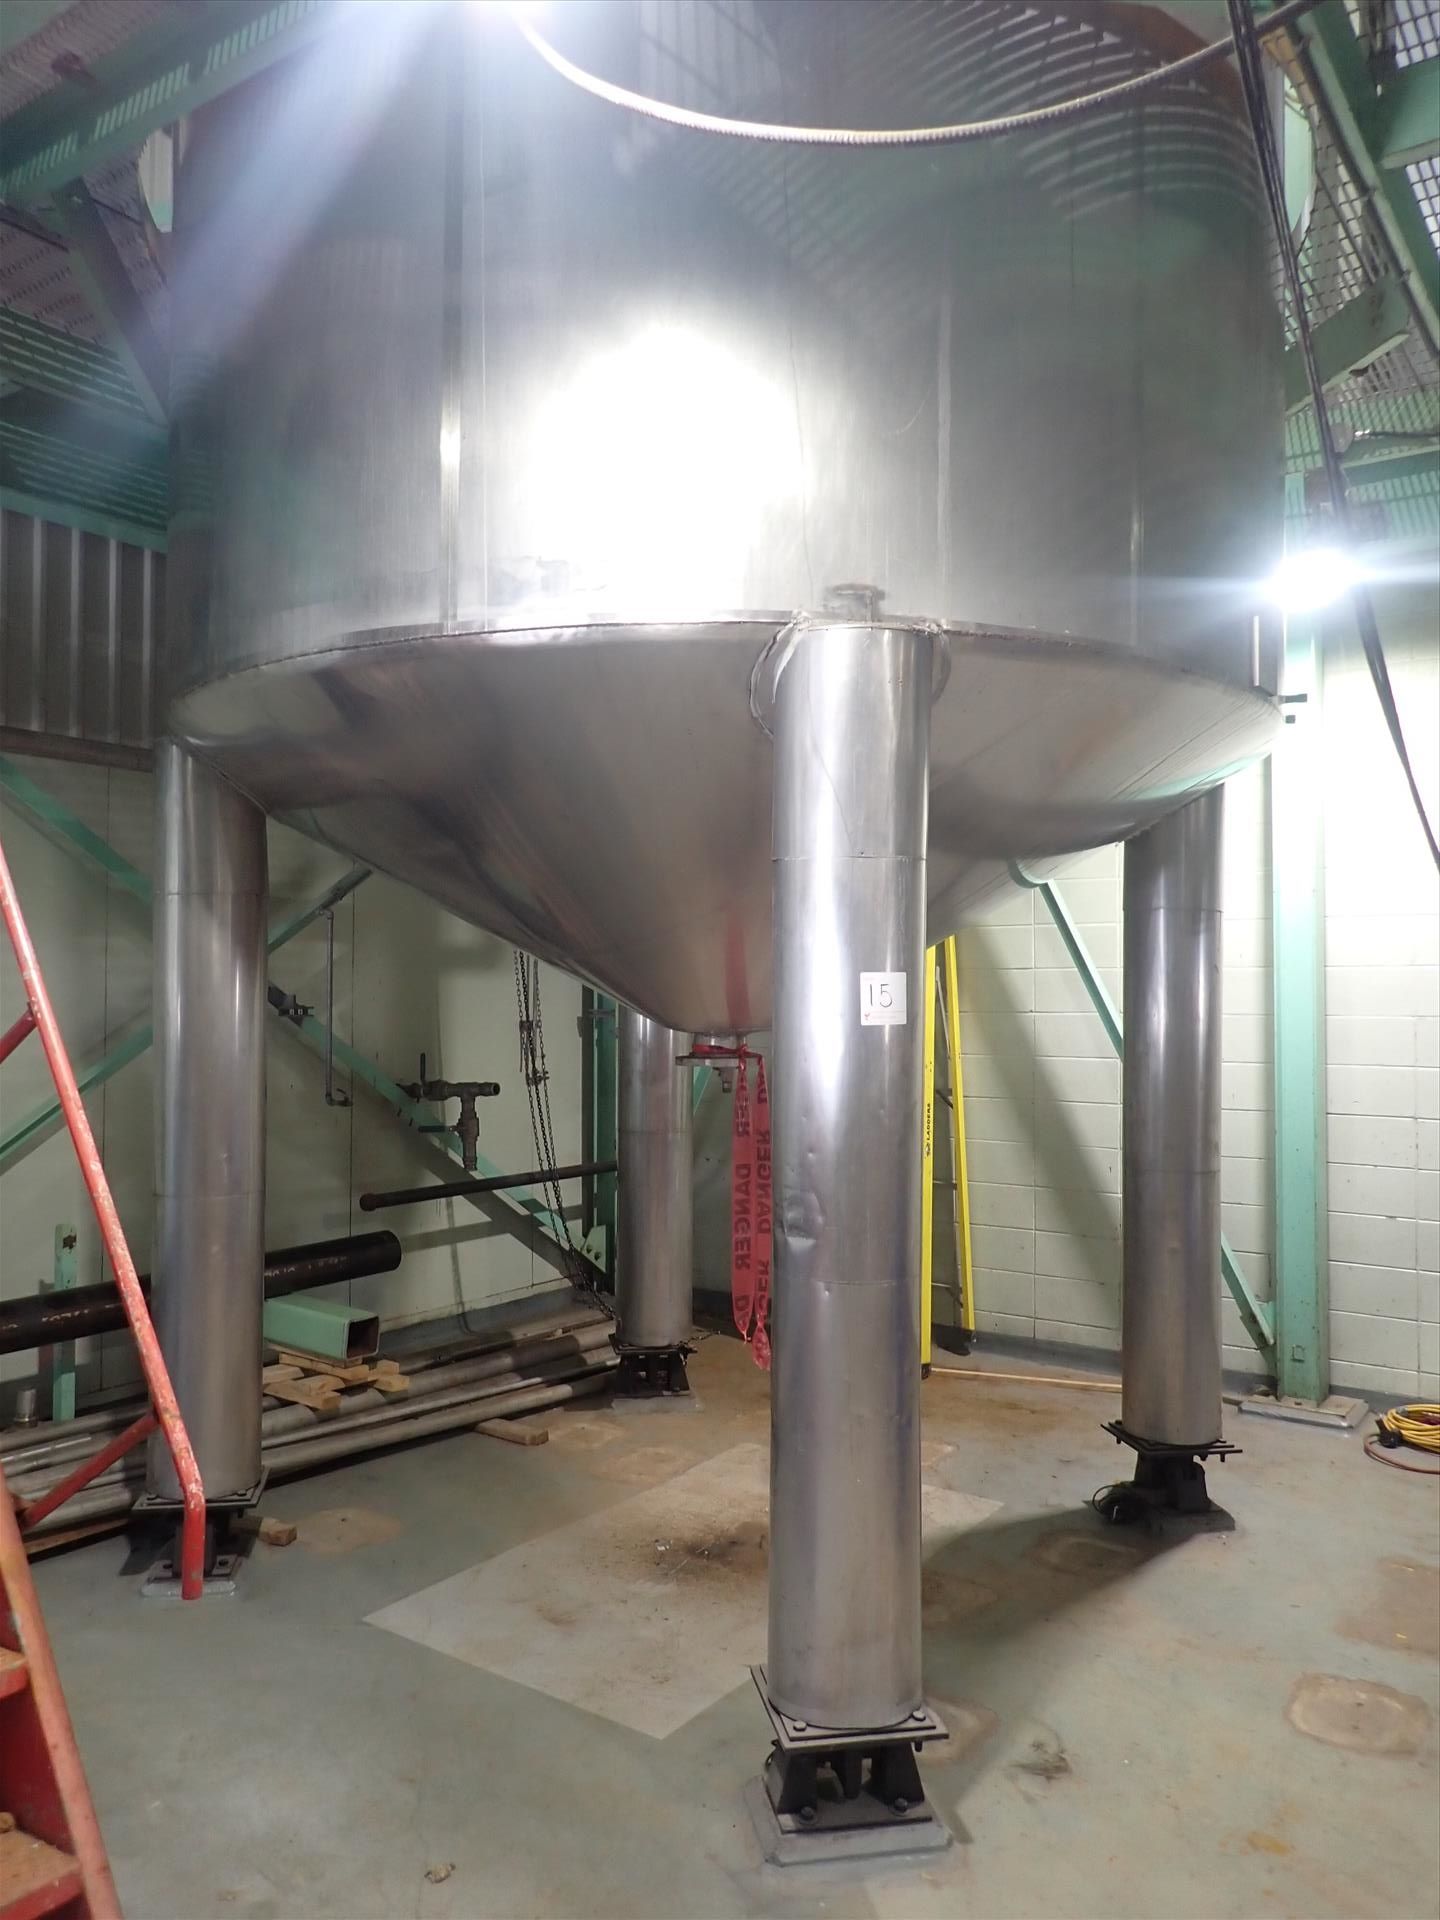 Inox-Tech Jacketed Tank 5400 gal., Stainless Steel, vertical. Internal rated 15 psi at 130 degrees - Image 7 of 11